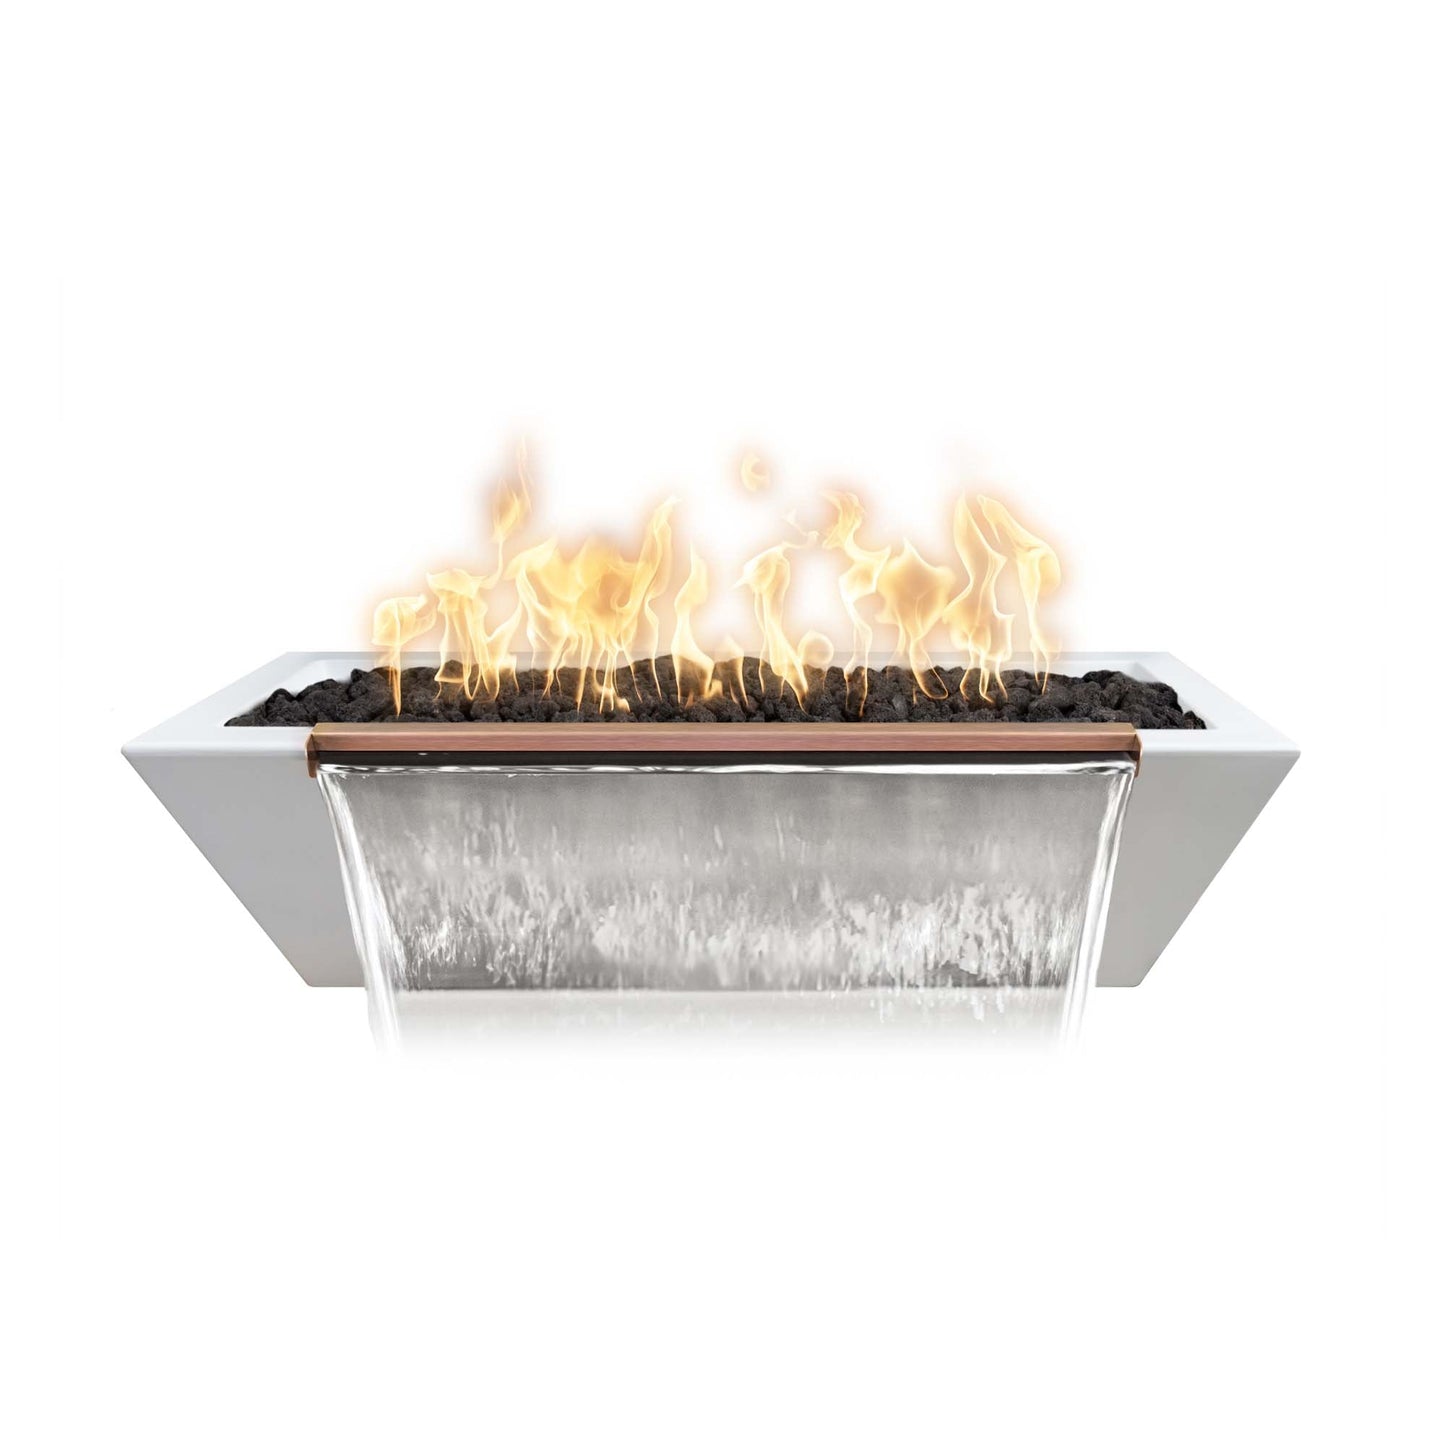 The Outdoor Plus Linear Maya 48" Black GFRC Concrete Natural Gas Fire & Water Bowl with Match Lit with Flame Sense Ignition